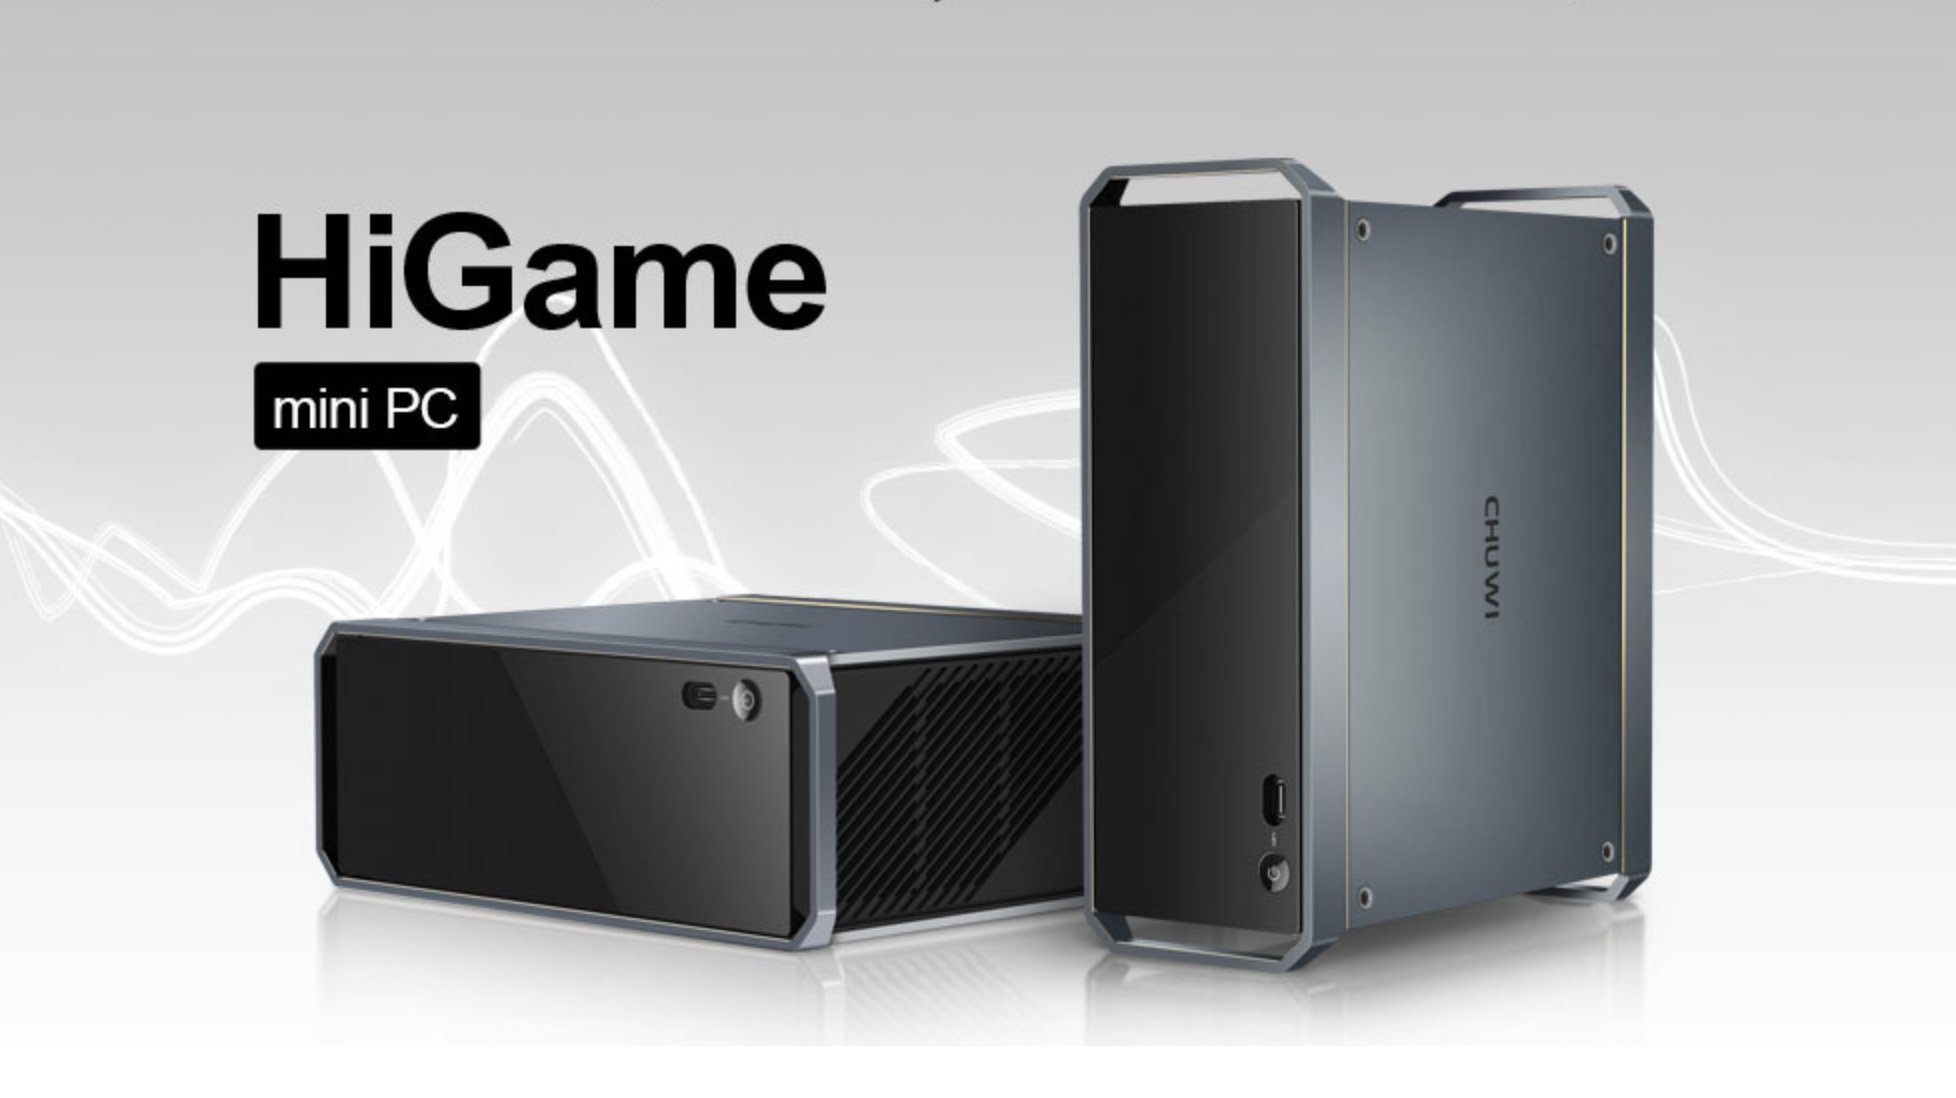 CHUWI's mini HiGame PC is expected to hit Indiegogo soon